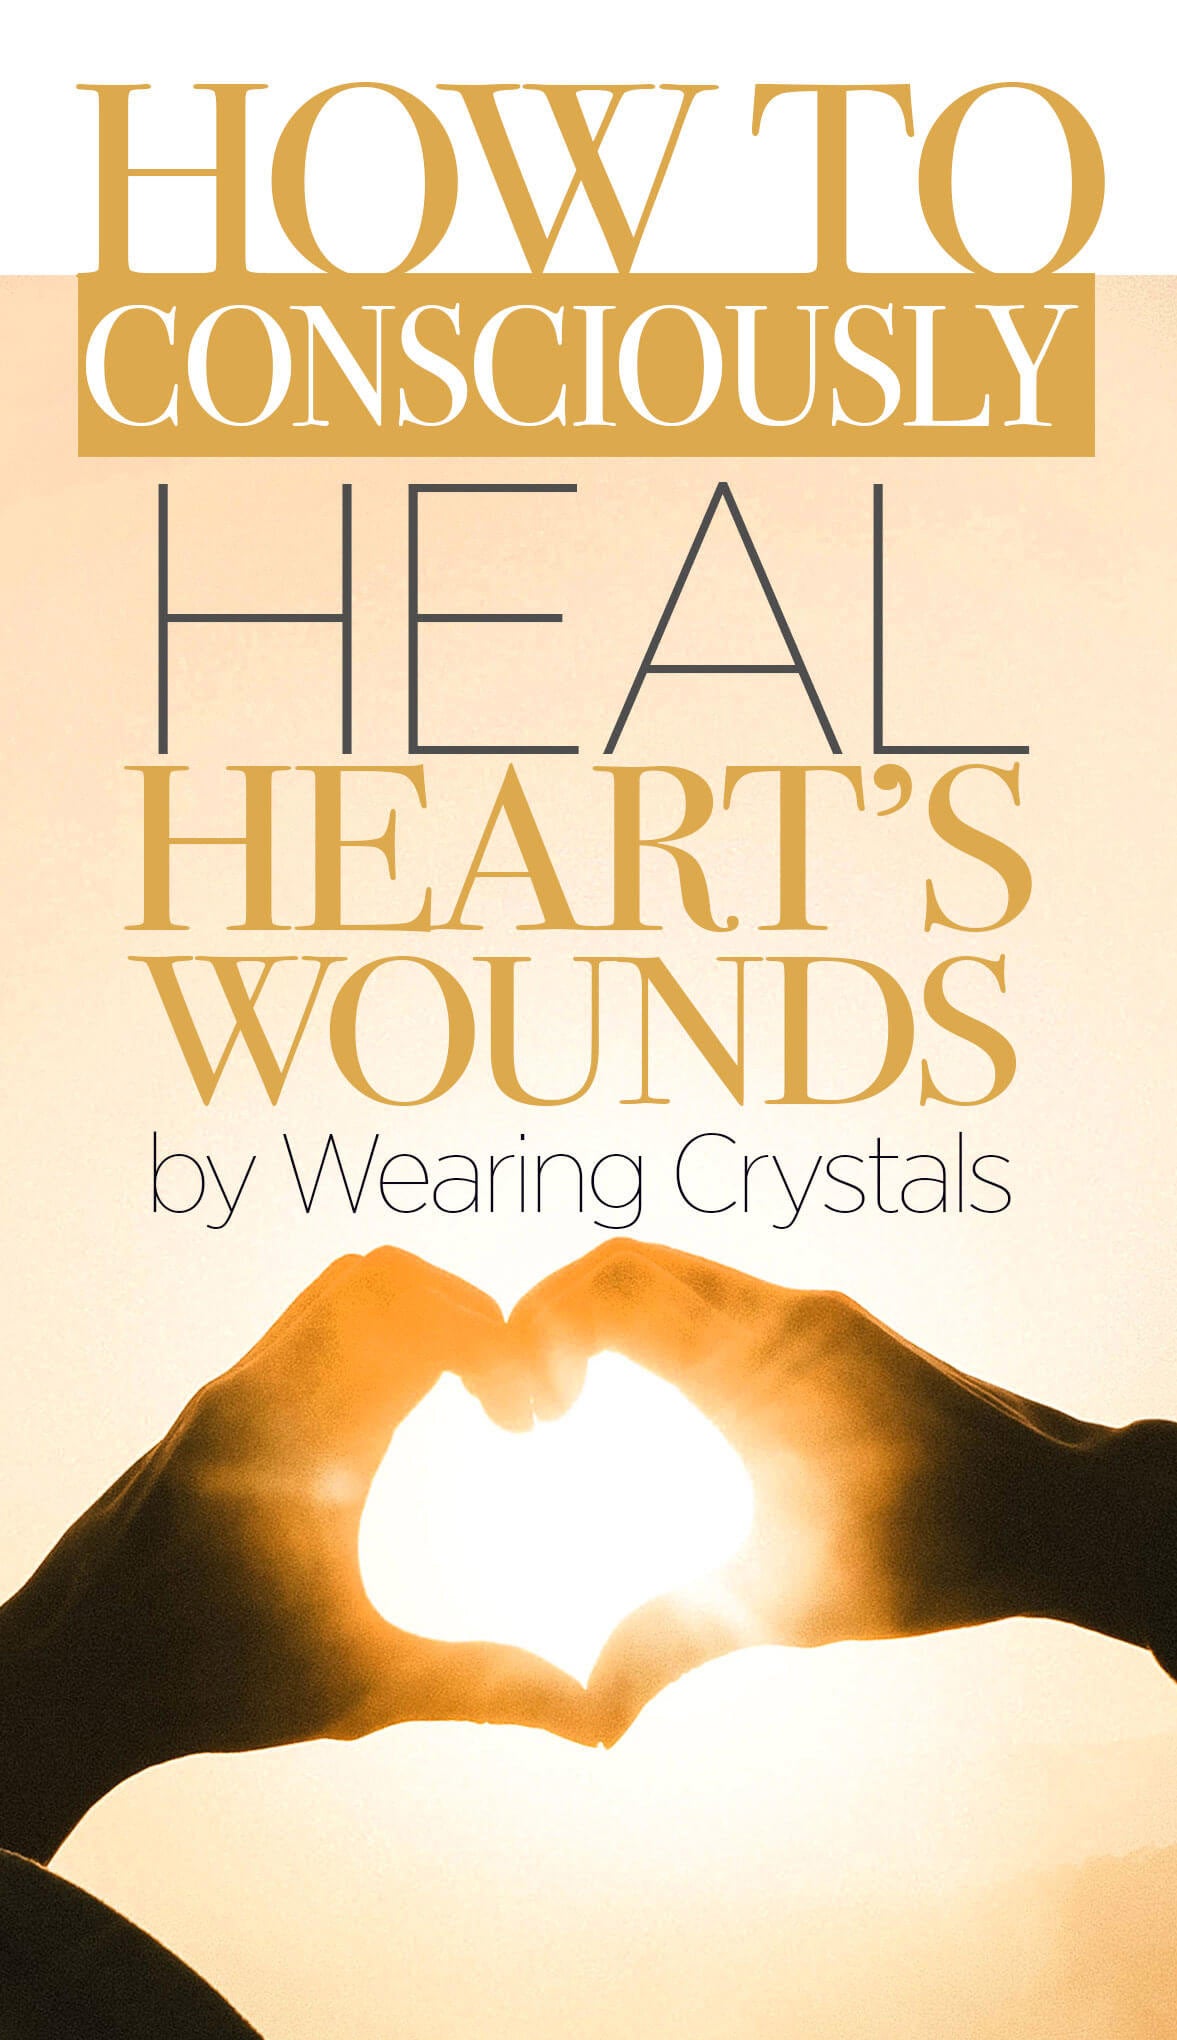 How to Consciously Heal Heart’s Wounds by Wearing Crystals